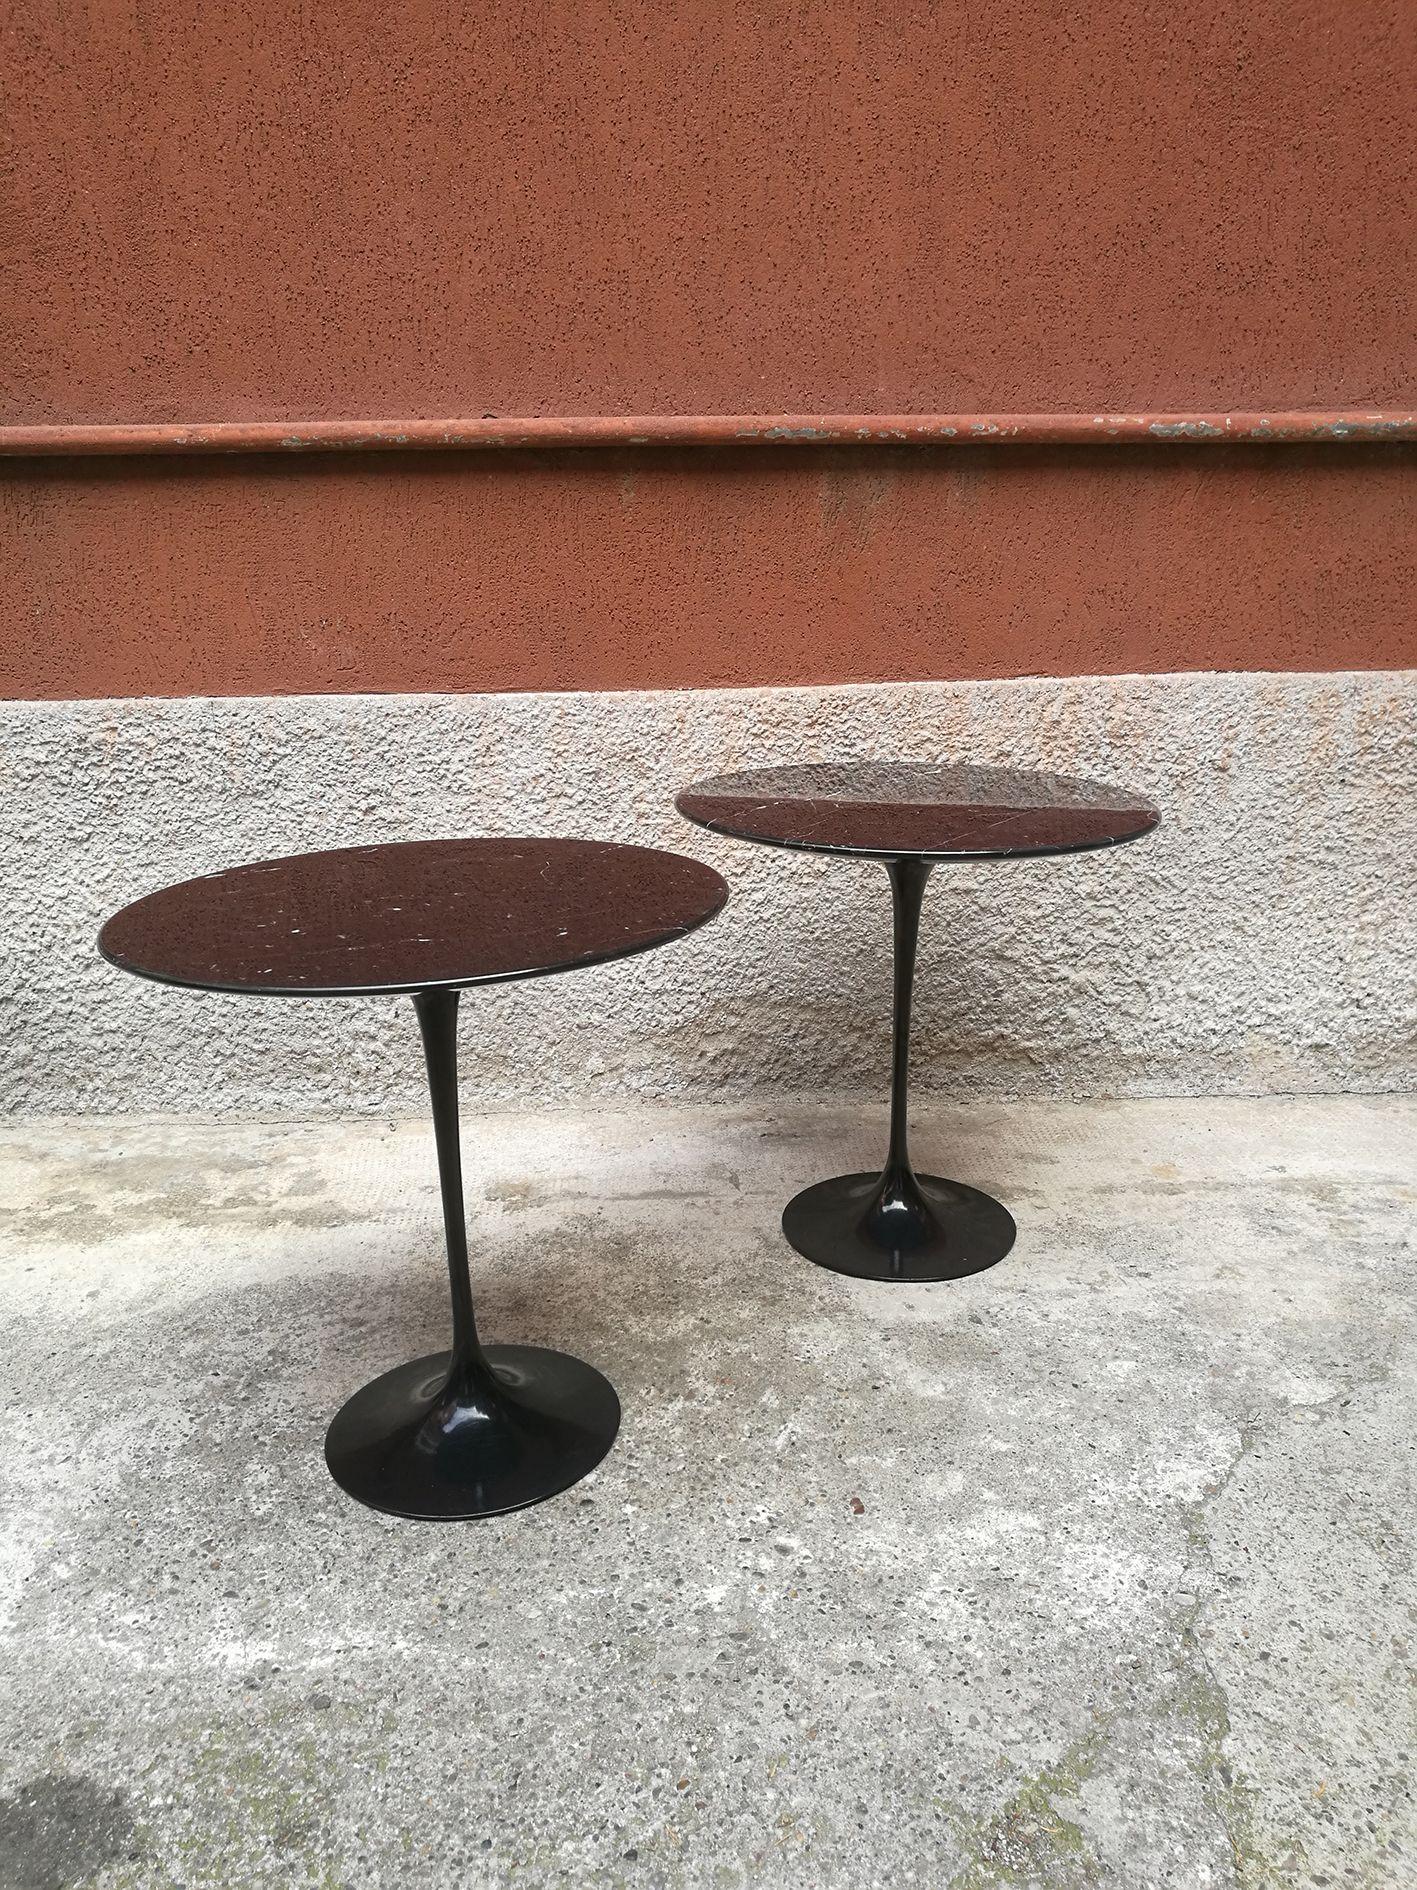 Pair of original and restored black marquinia side table designed by Eero Saarinen for Knoll International
In the 1950 period Eero Saarinen designed for Knoll this pair of table.
This beautiful pair of tulip side table in black marquinia marble